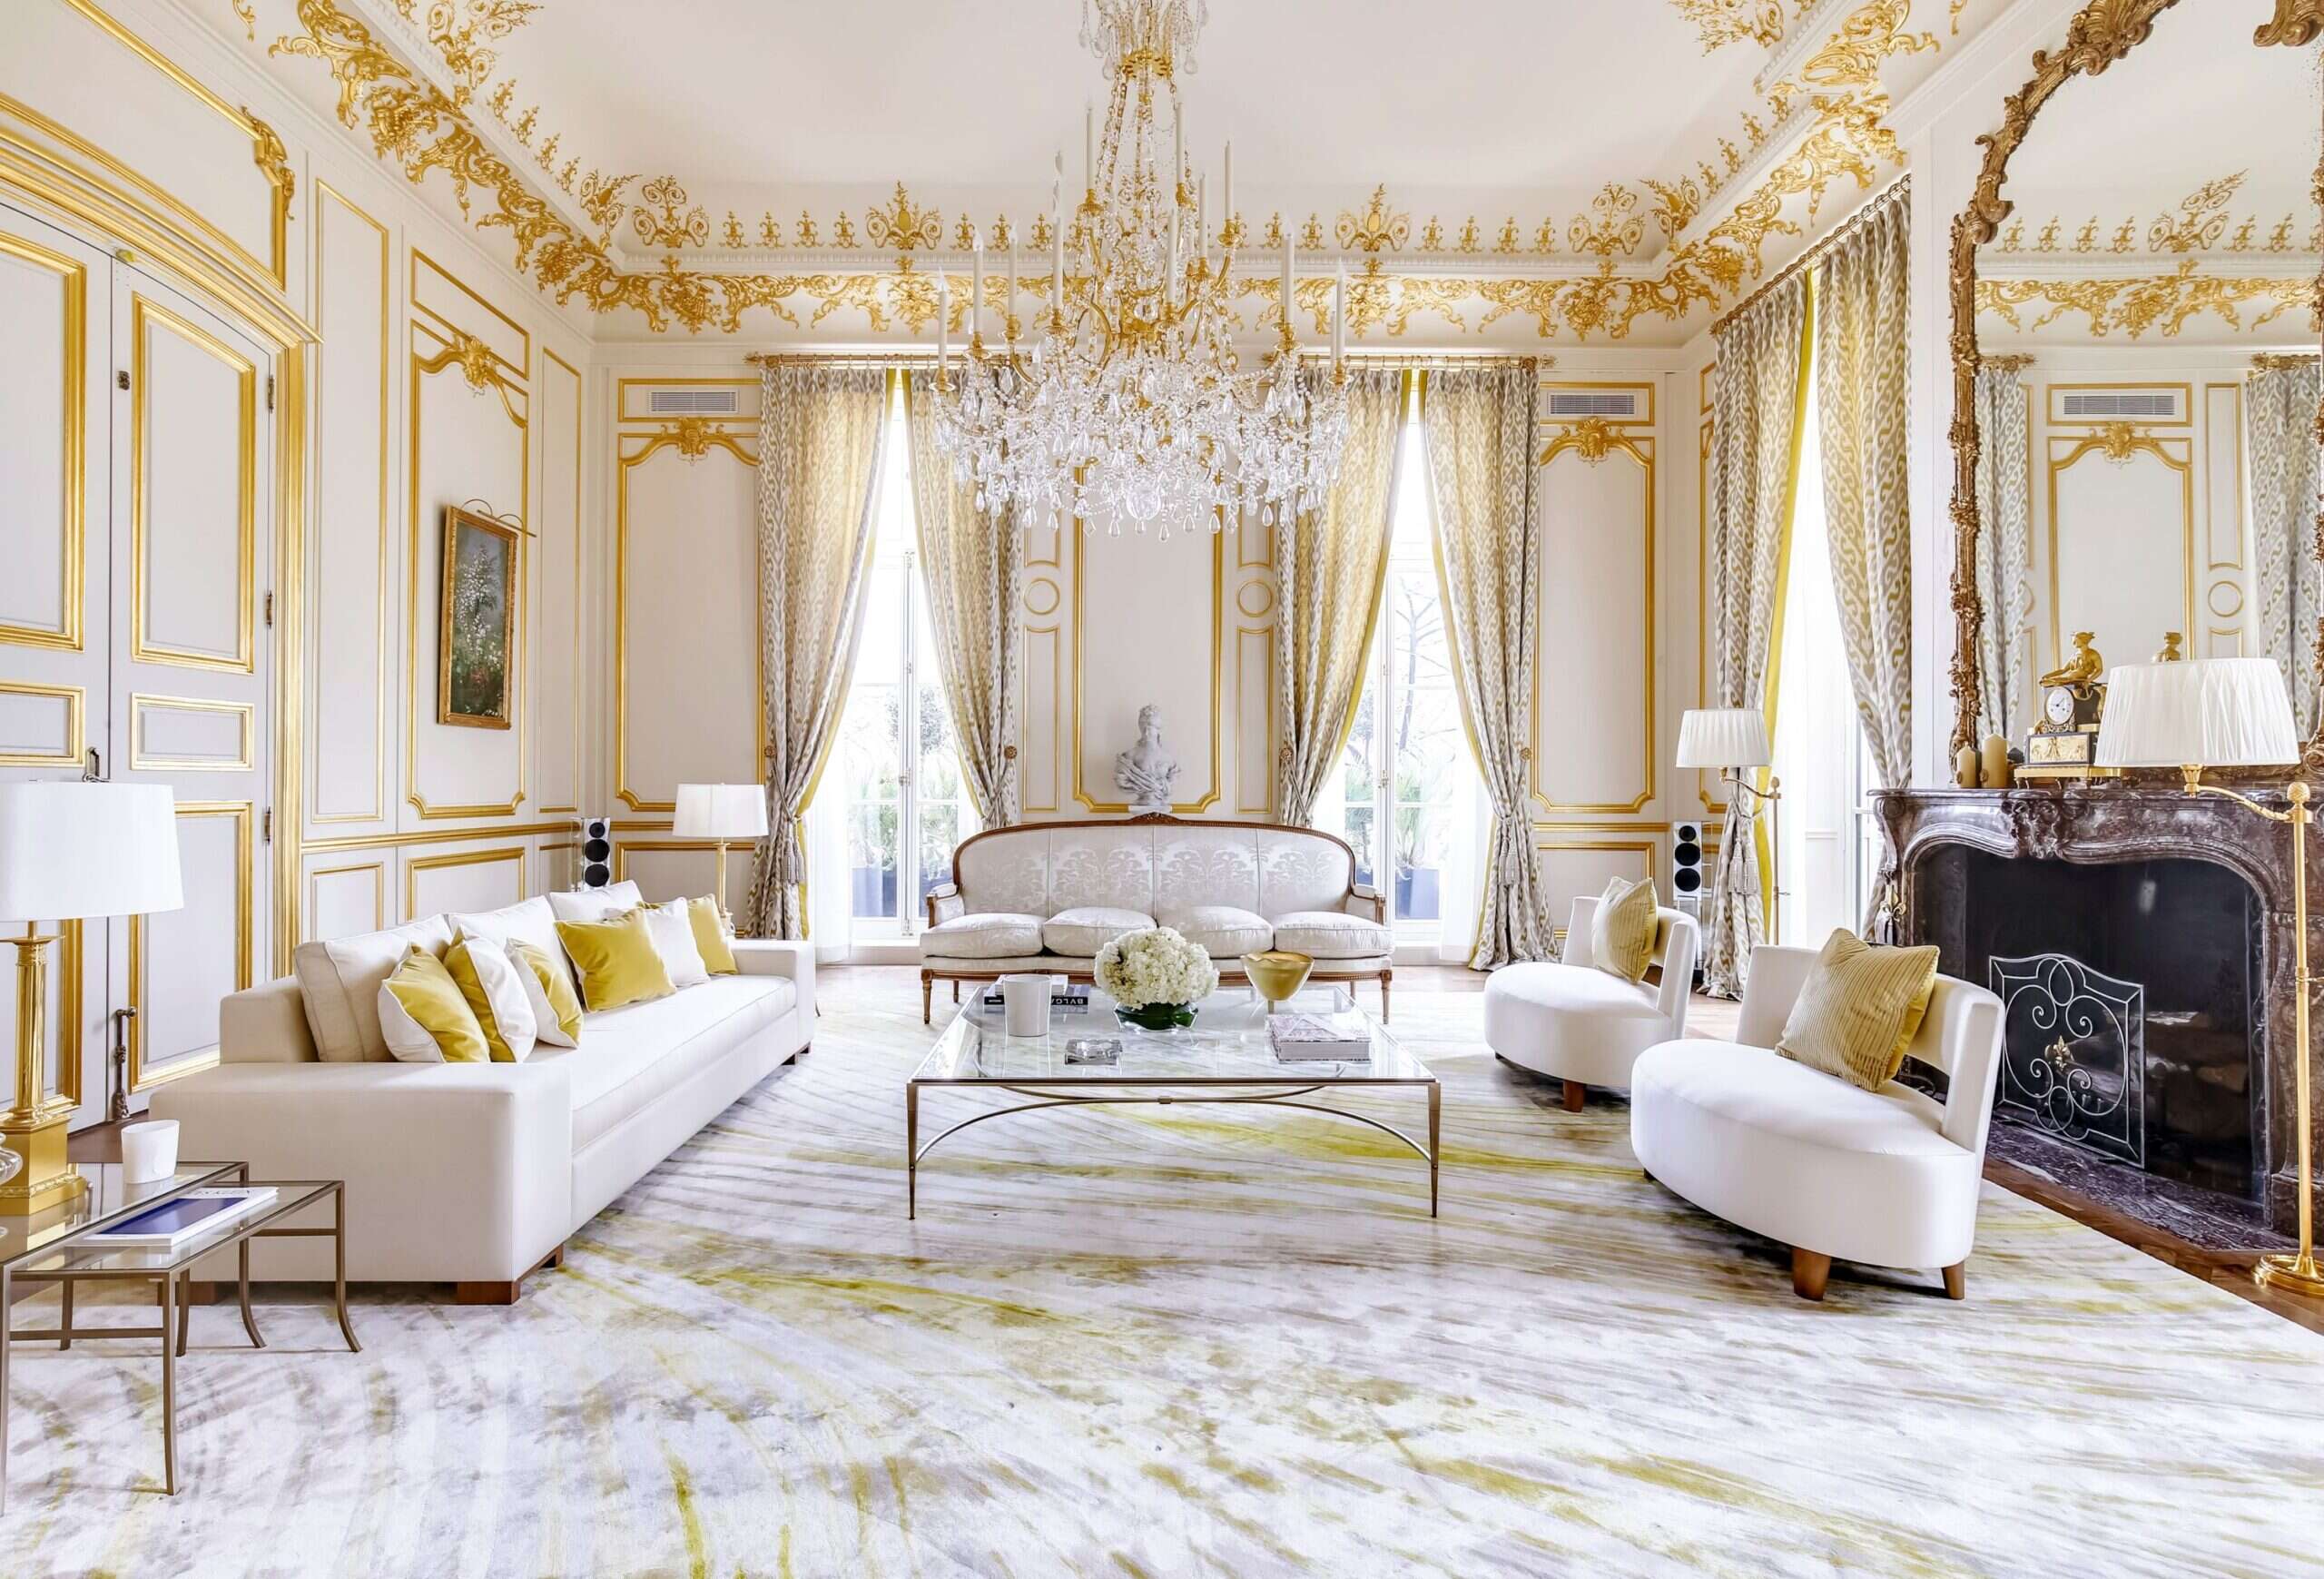 This Paris Apartment is the Most Expensive Sold This Year